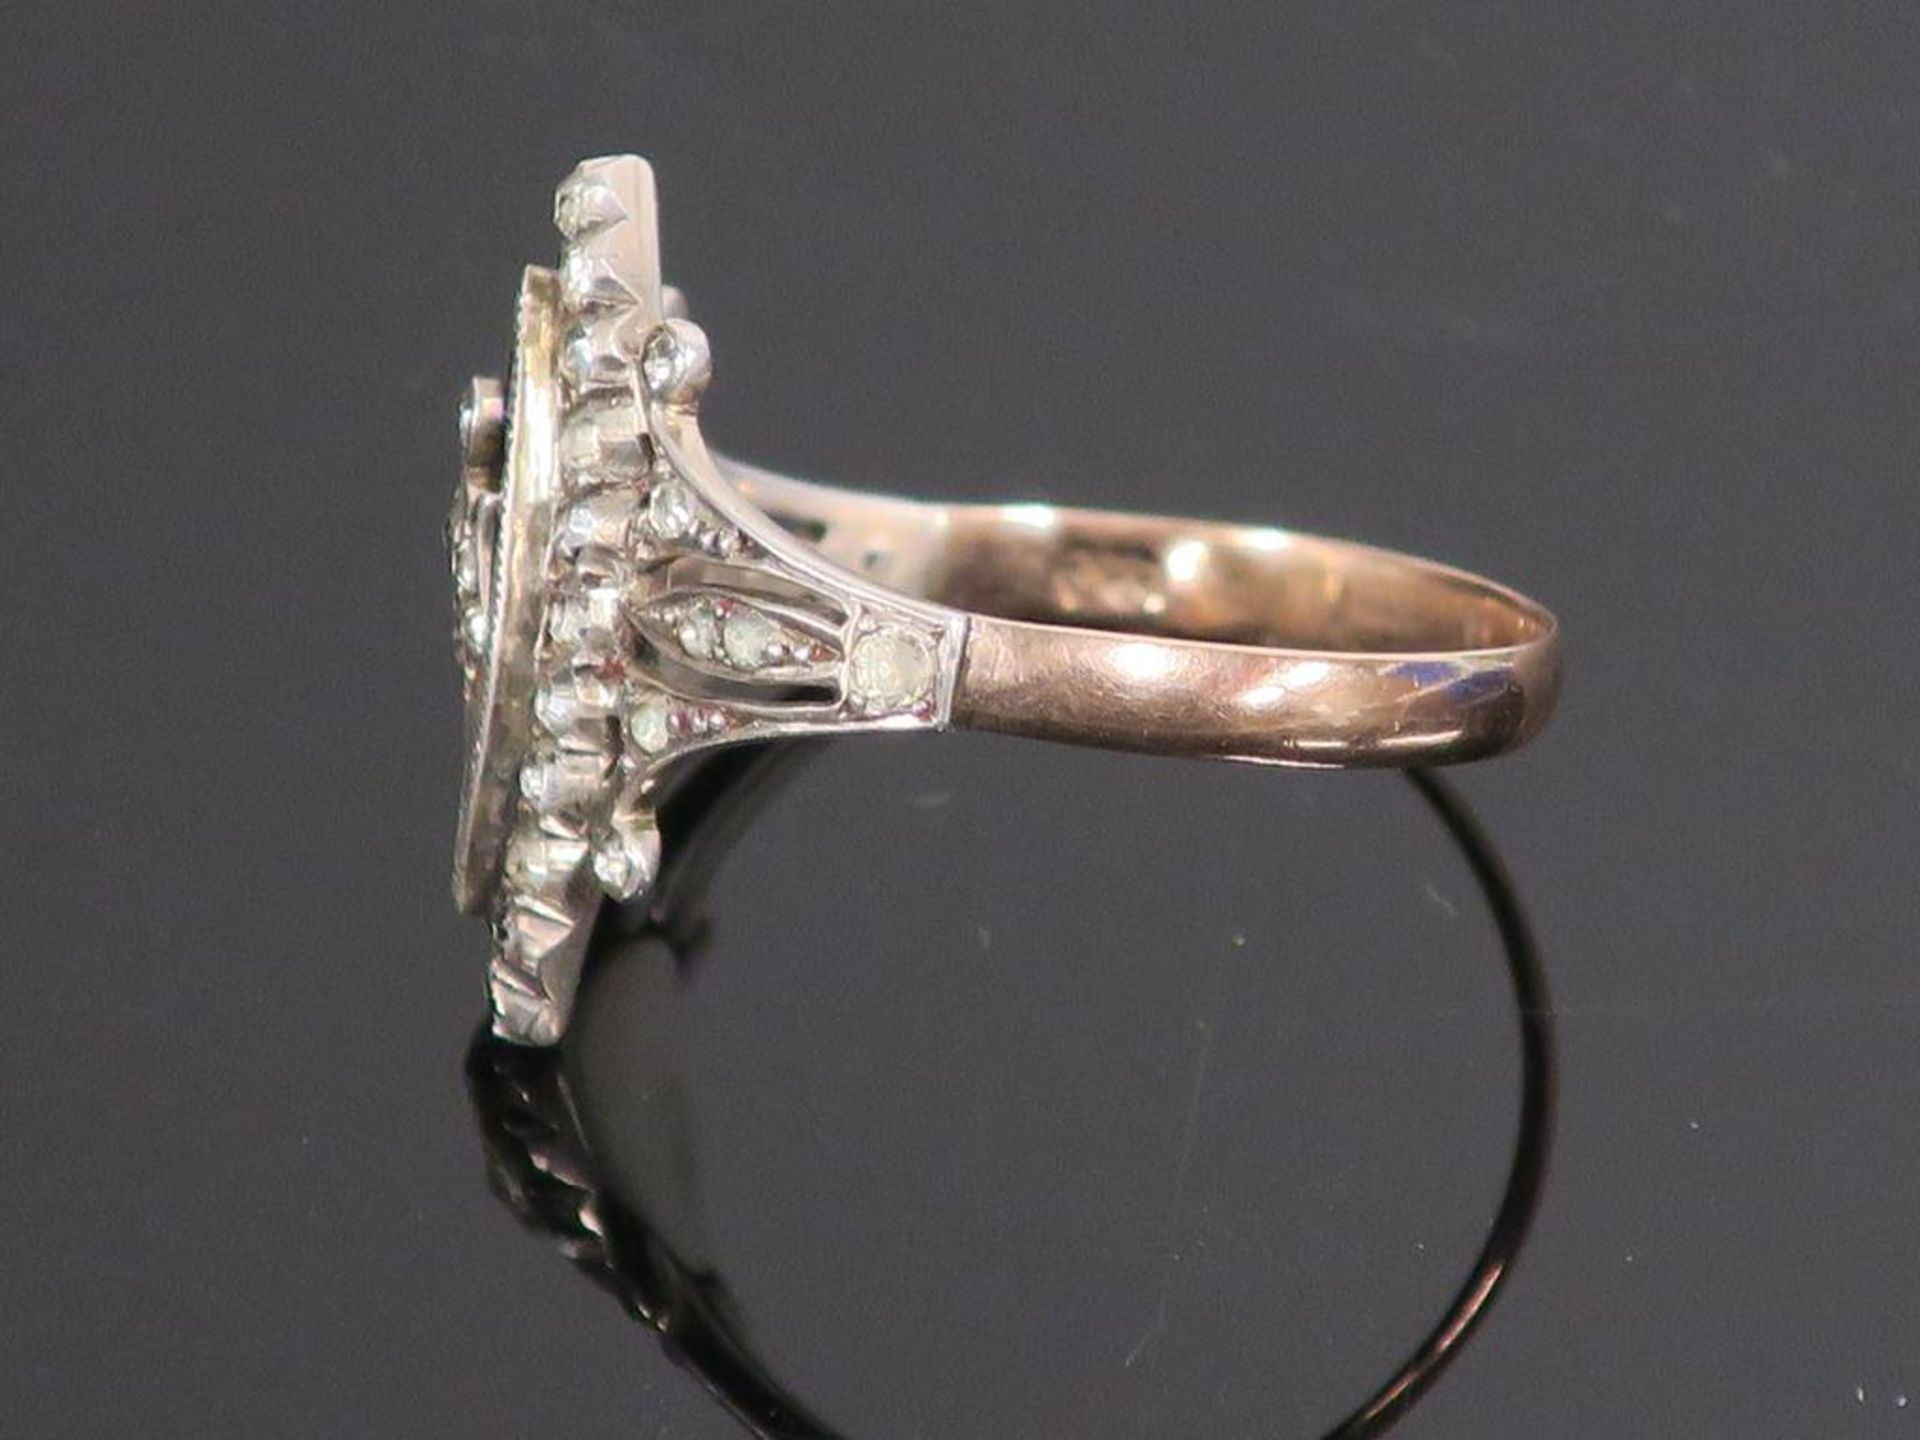 An Antique Paste and Enamel 9ct Gold and Silver Ring (c 1910) (size U) (est £60-£120) - Image 3 of 3